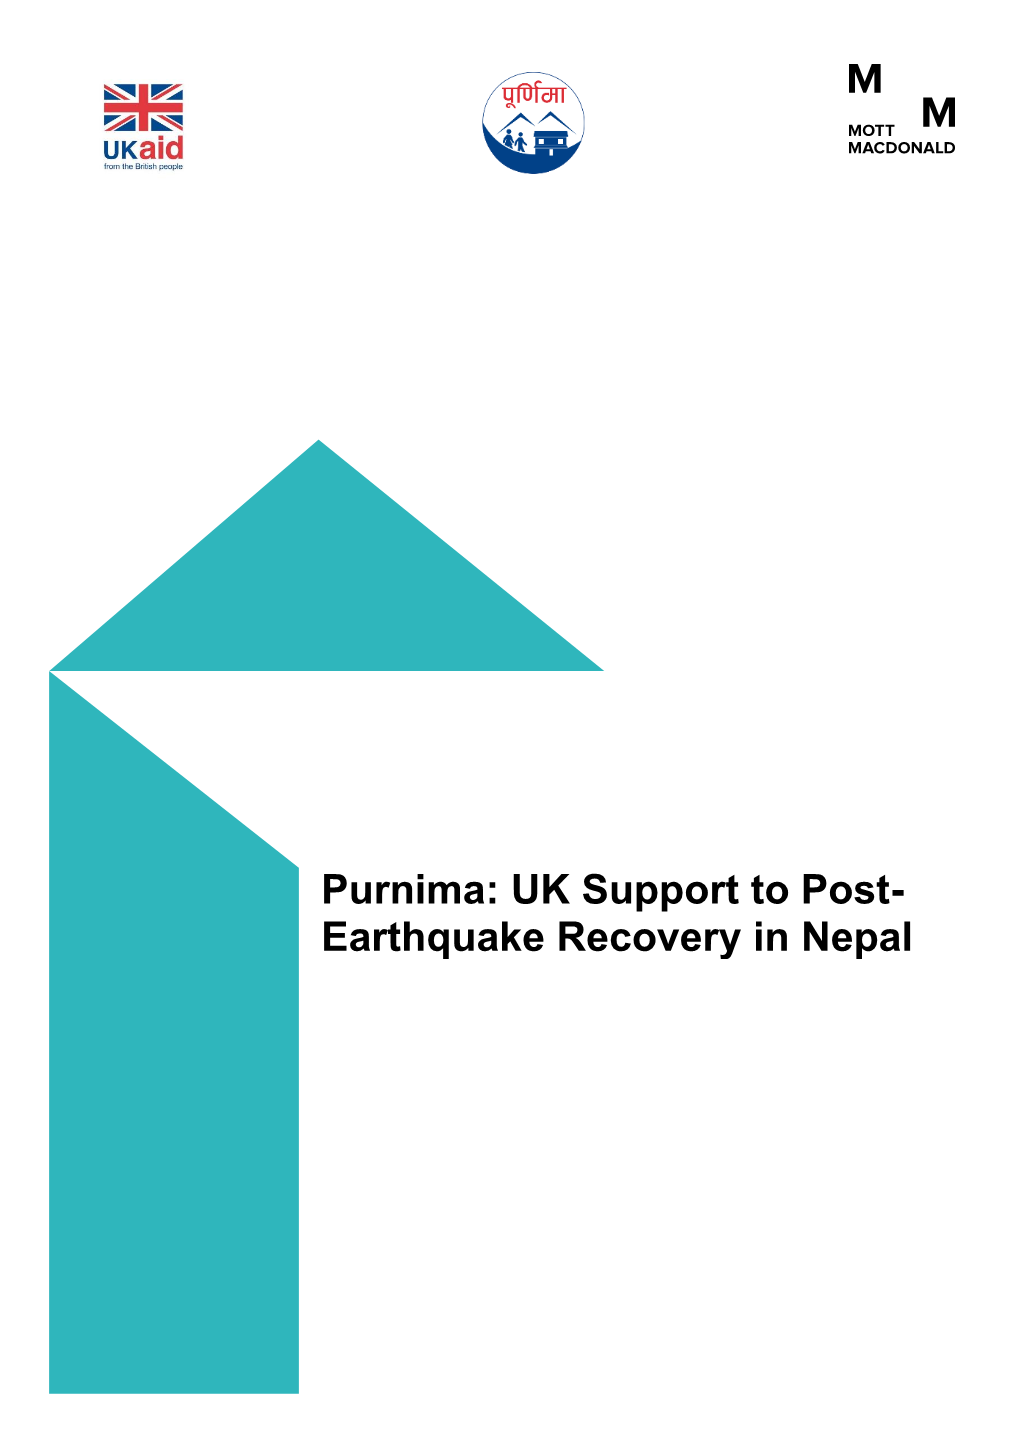 UK Support to Post- Earthquake Recovery in Nepal